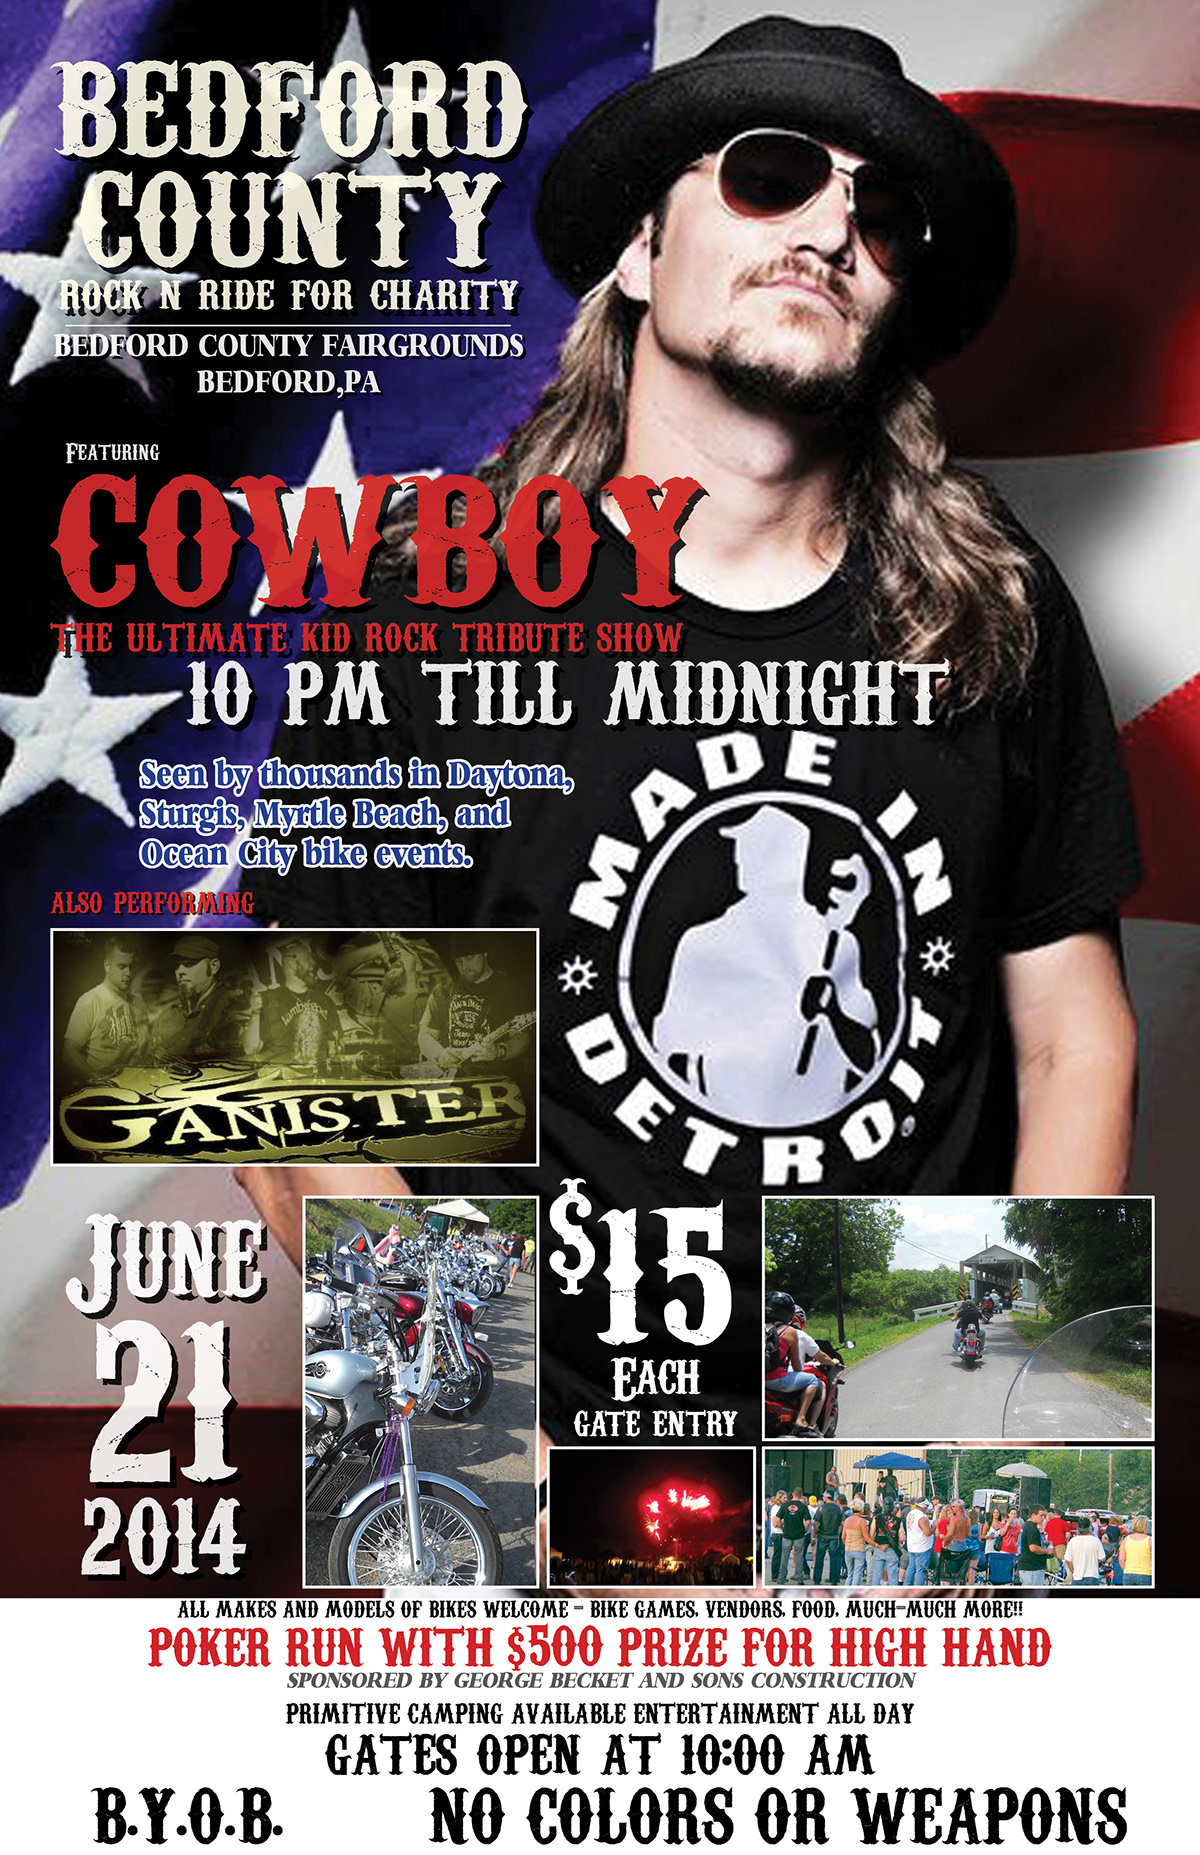 Motorcycle Ride kid rock tribute Charity event